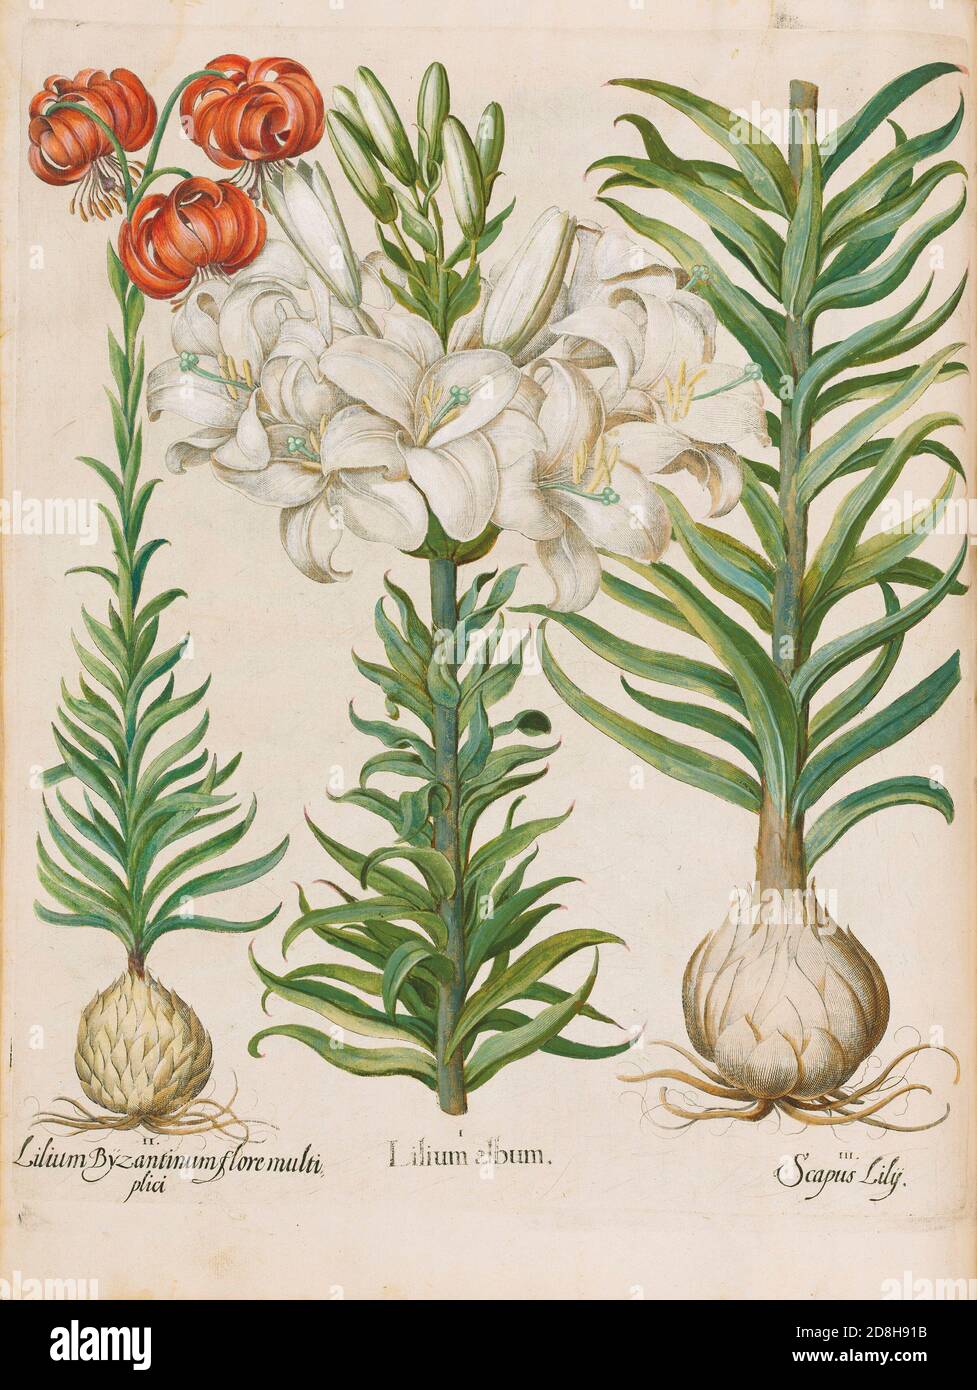 Lilies flowers. Lilium album, botanical illustration by Basil Besler from the The Hortus Eystettensis, a codex produced by Basilius Besler in 1613. Stock Photo